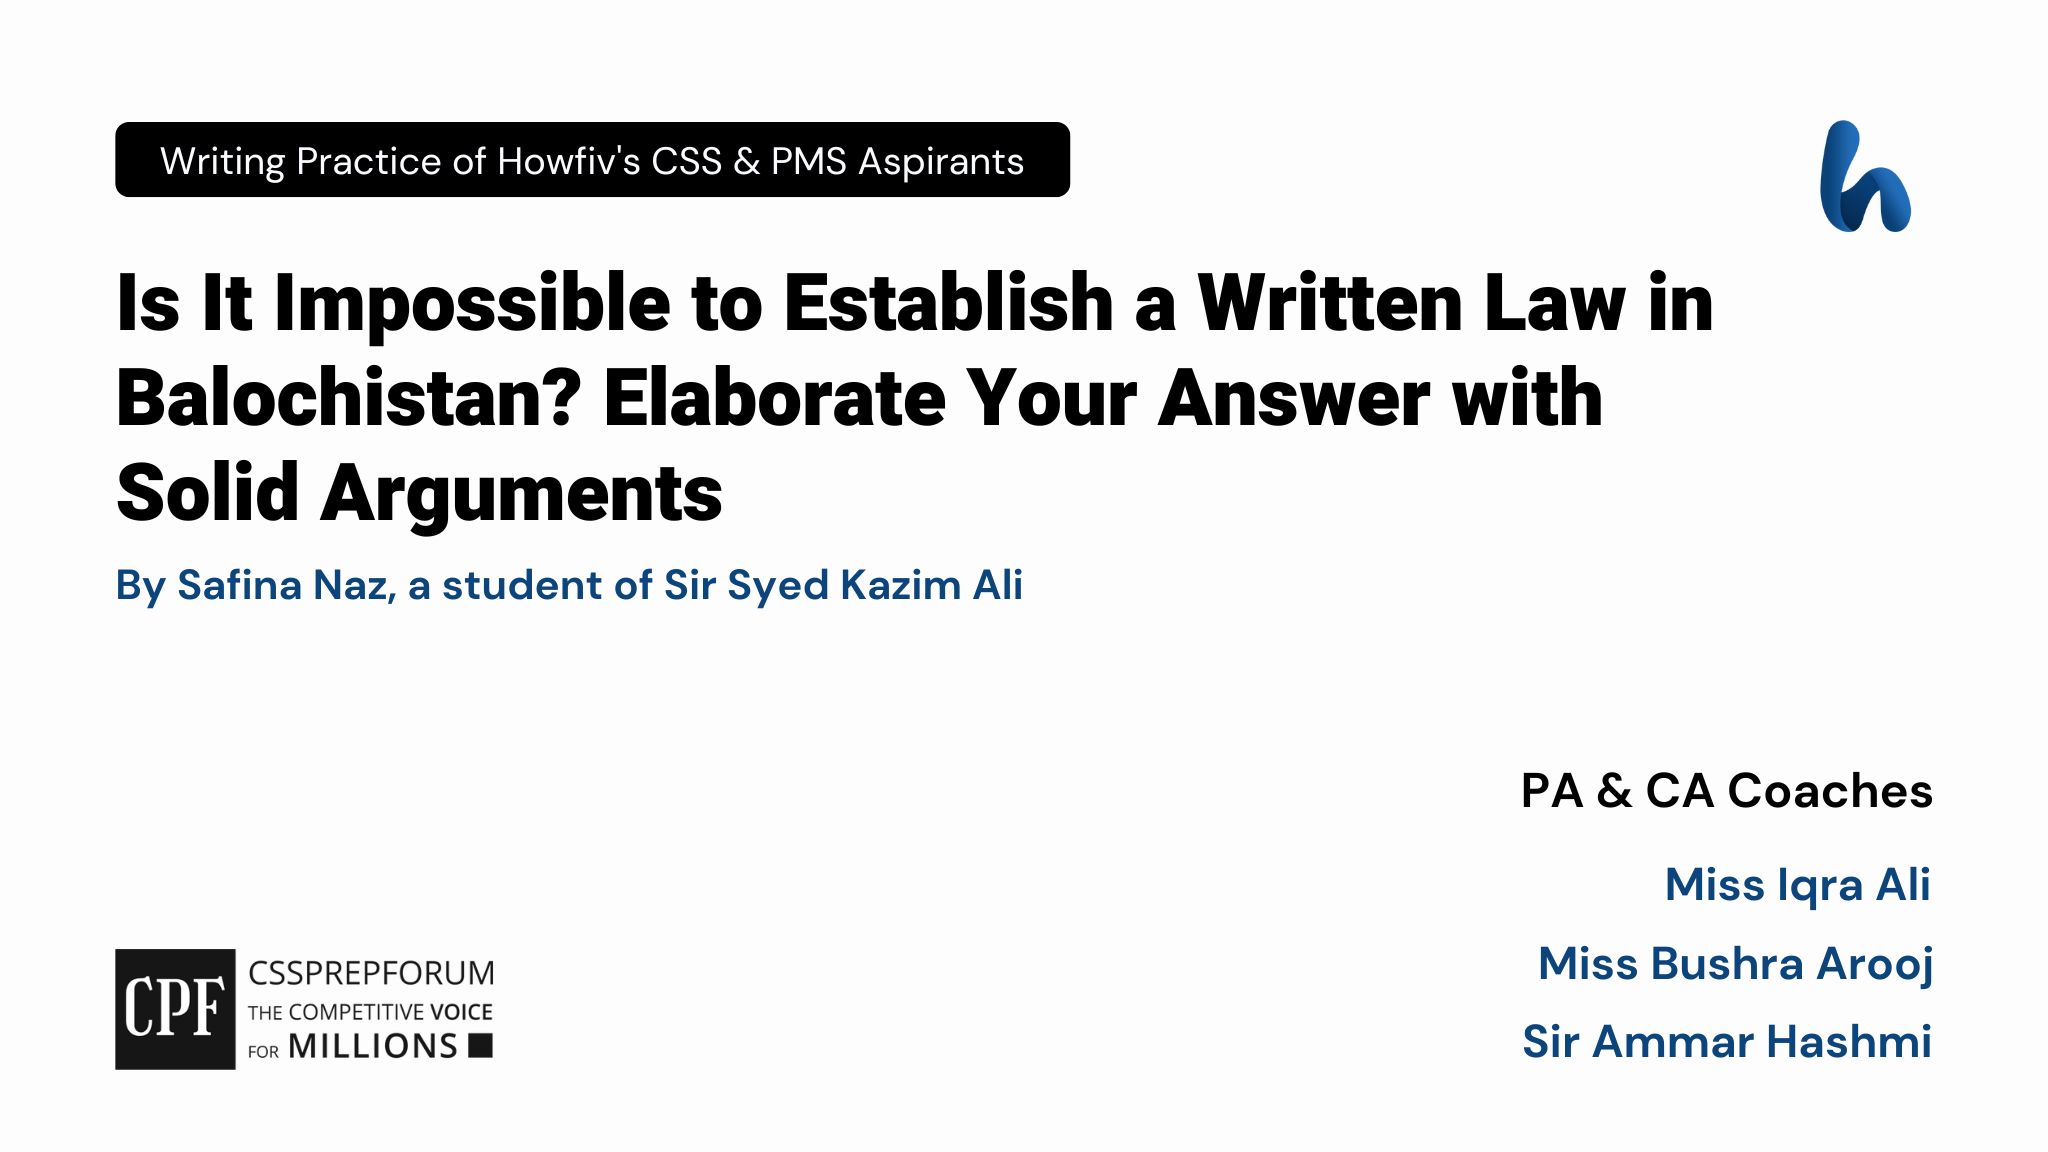 Possibilities to Establish a Written Law in Balochistan | CSS Current Affairs article is written by Safina Naz, a student of Sir Syed Kazim Ali...